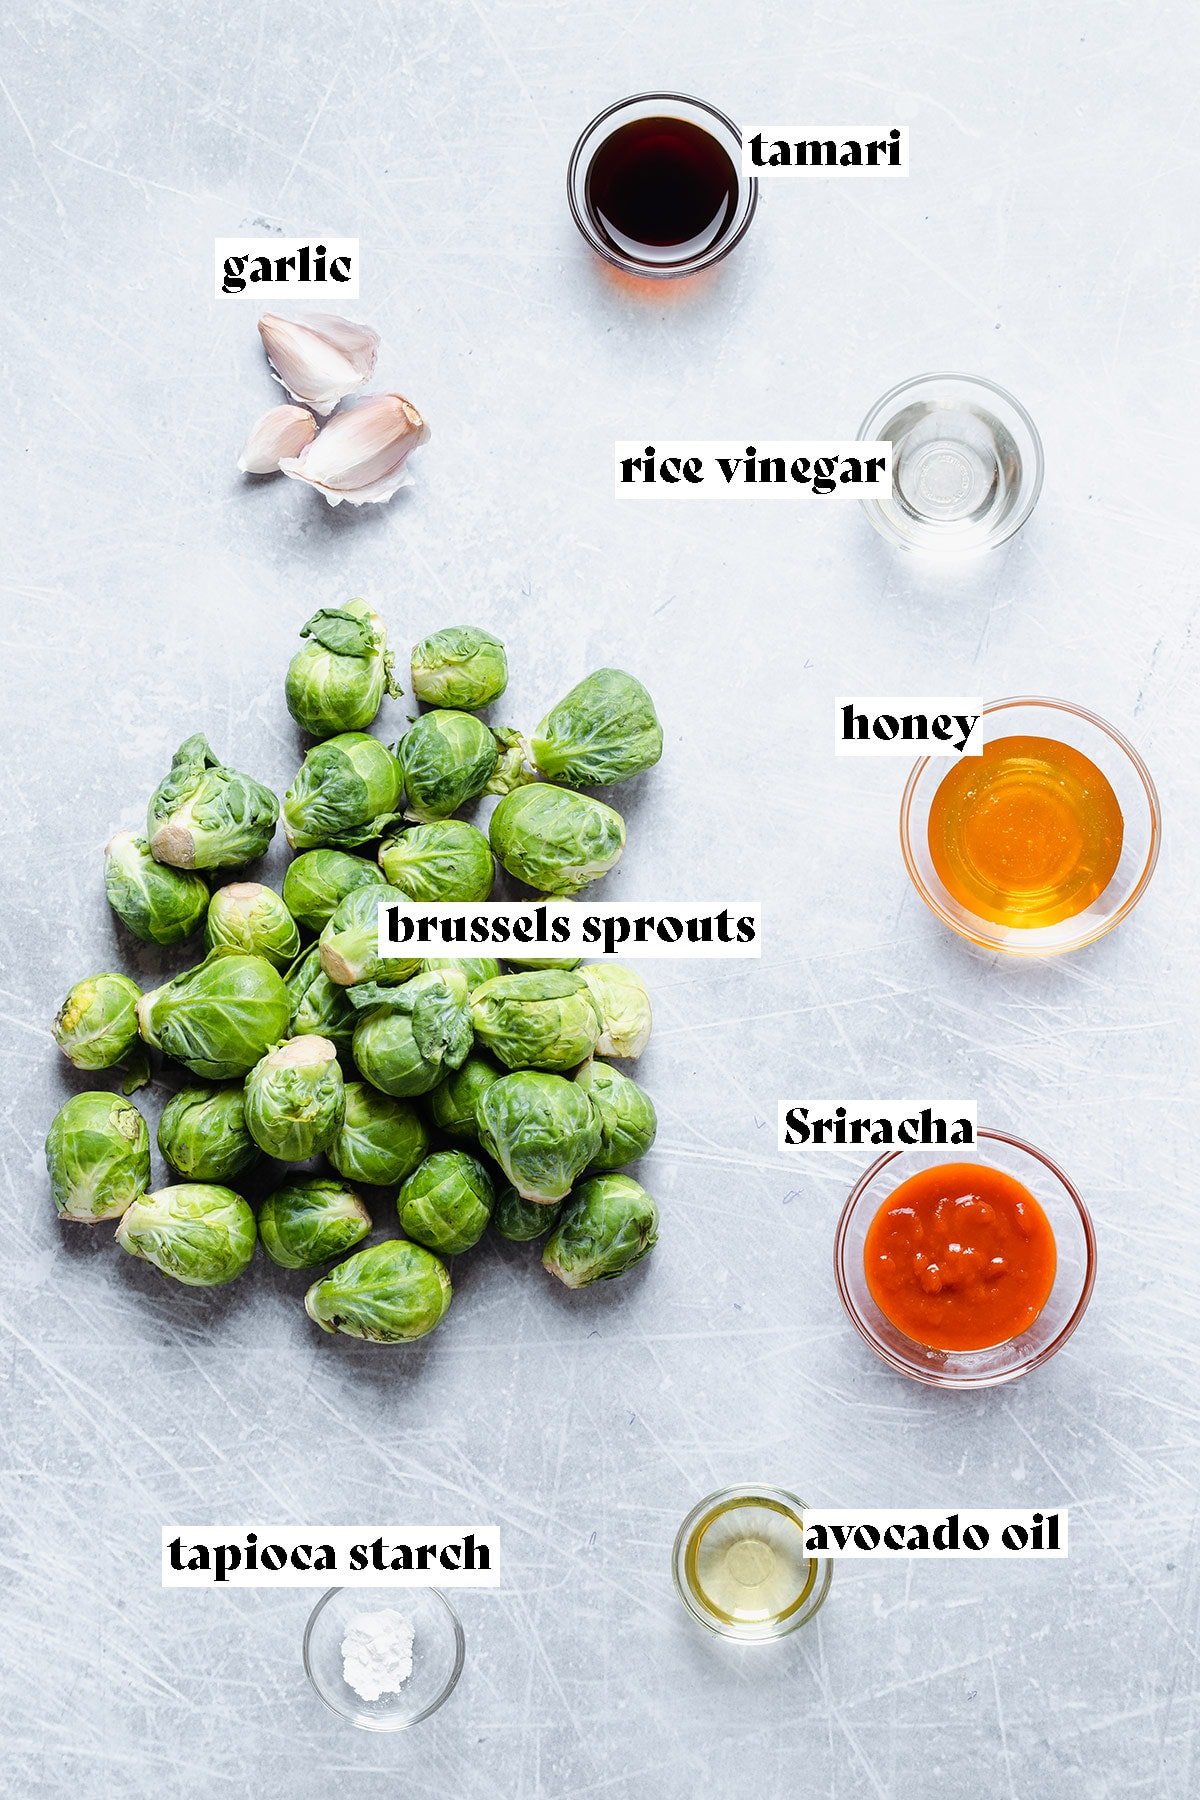 Brussels Sprouts, sriracha, honey, and other ingredients on a grey background.